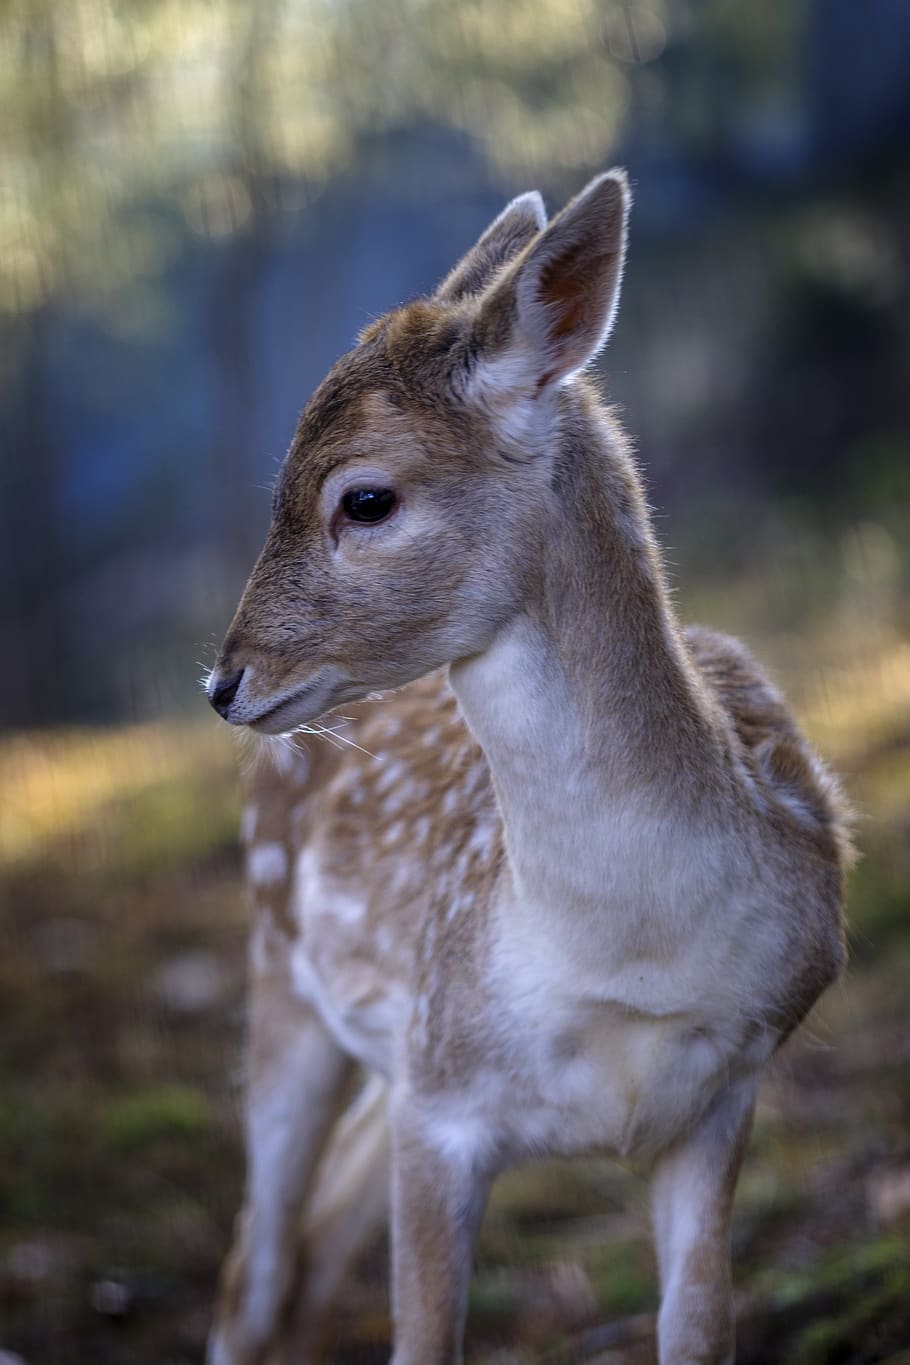 rudolph, fawn, deer, wild, nature, animal, forest, cute, baby, portrait